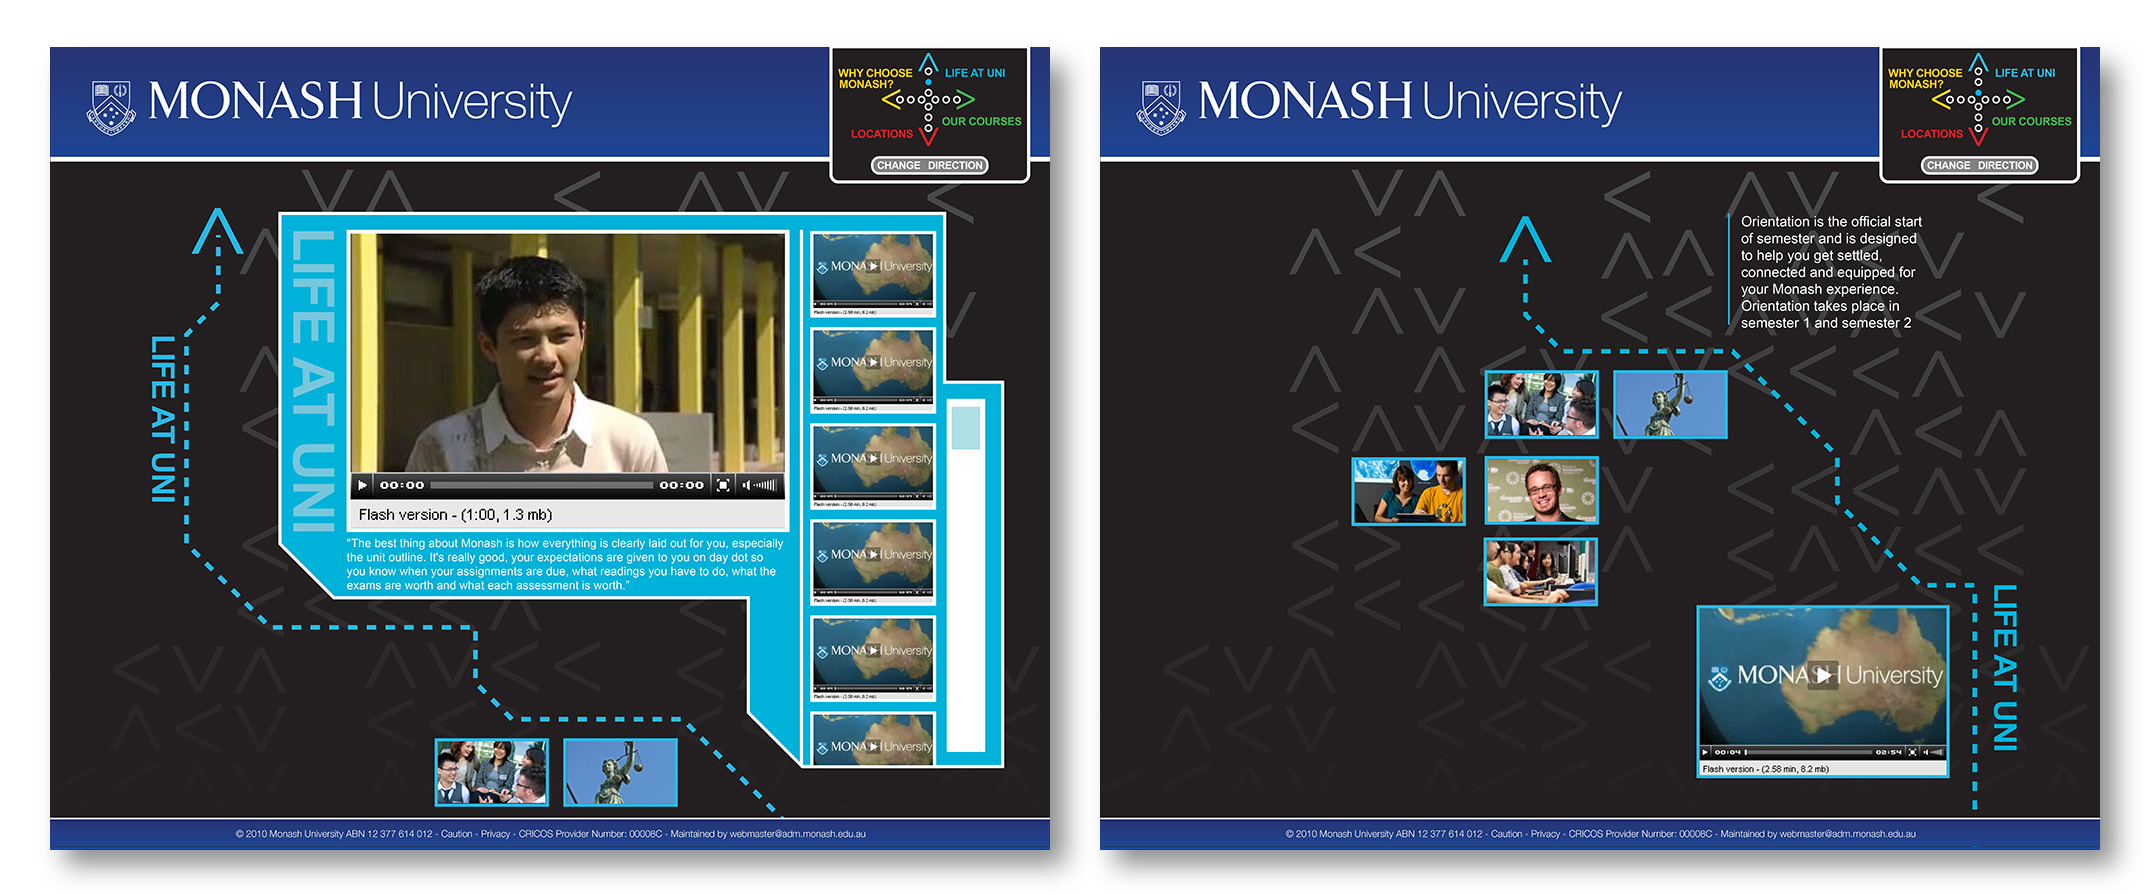 Our locations - Look at Monash